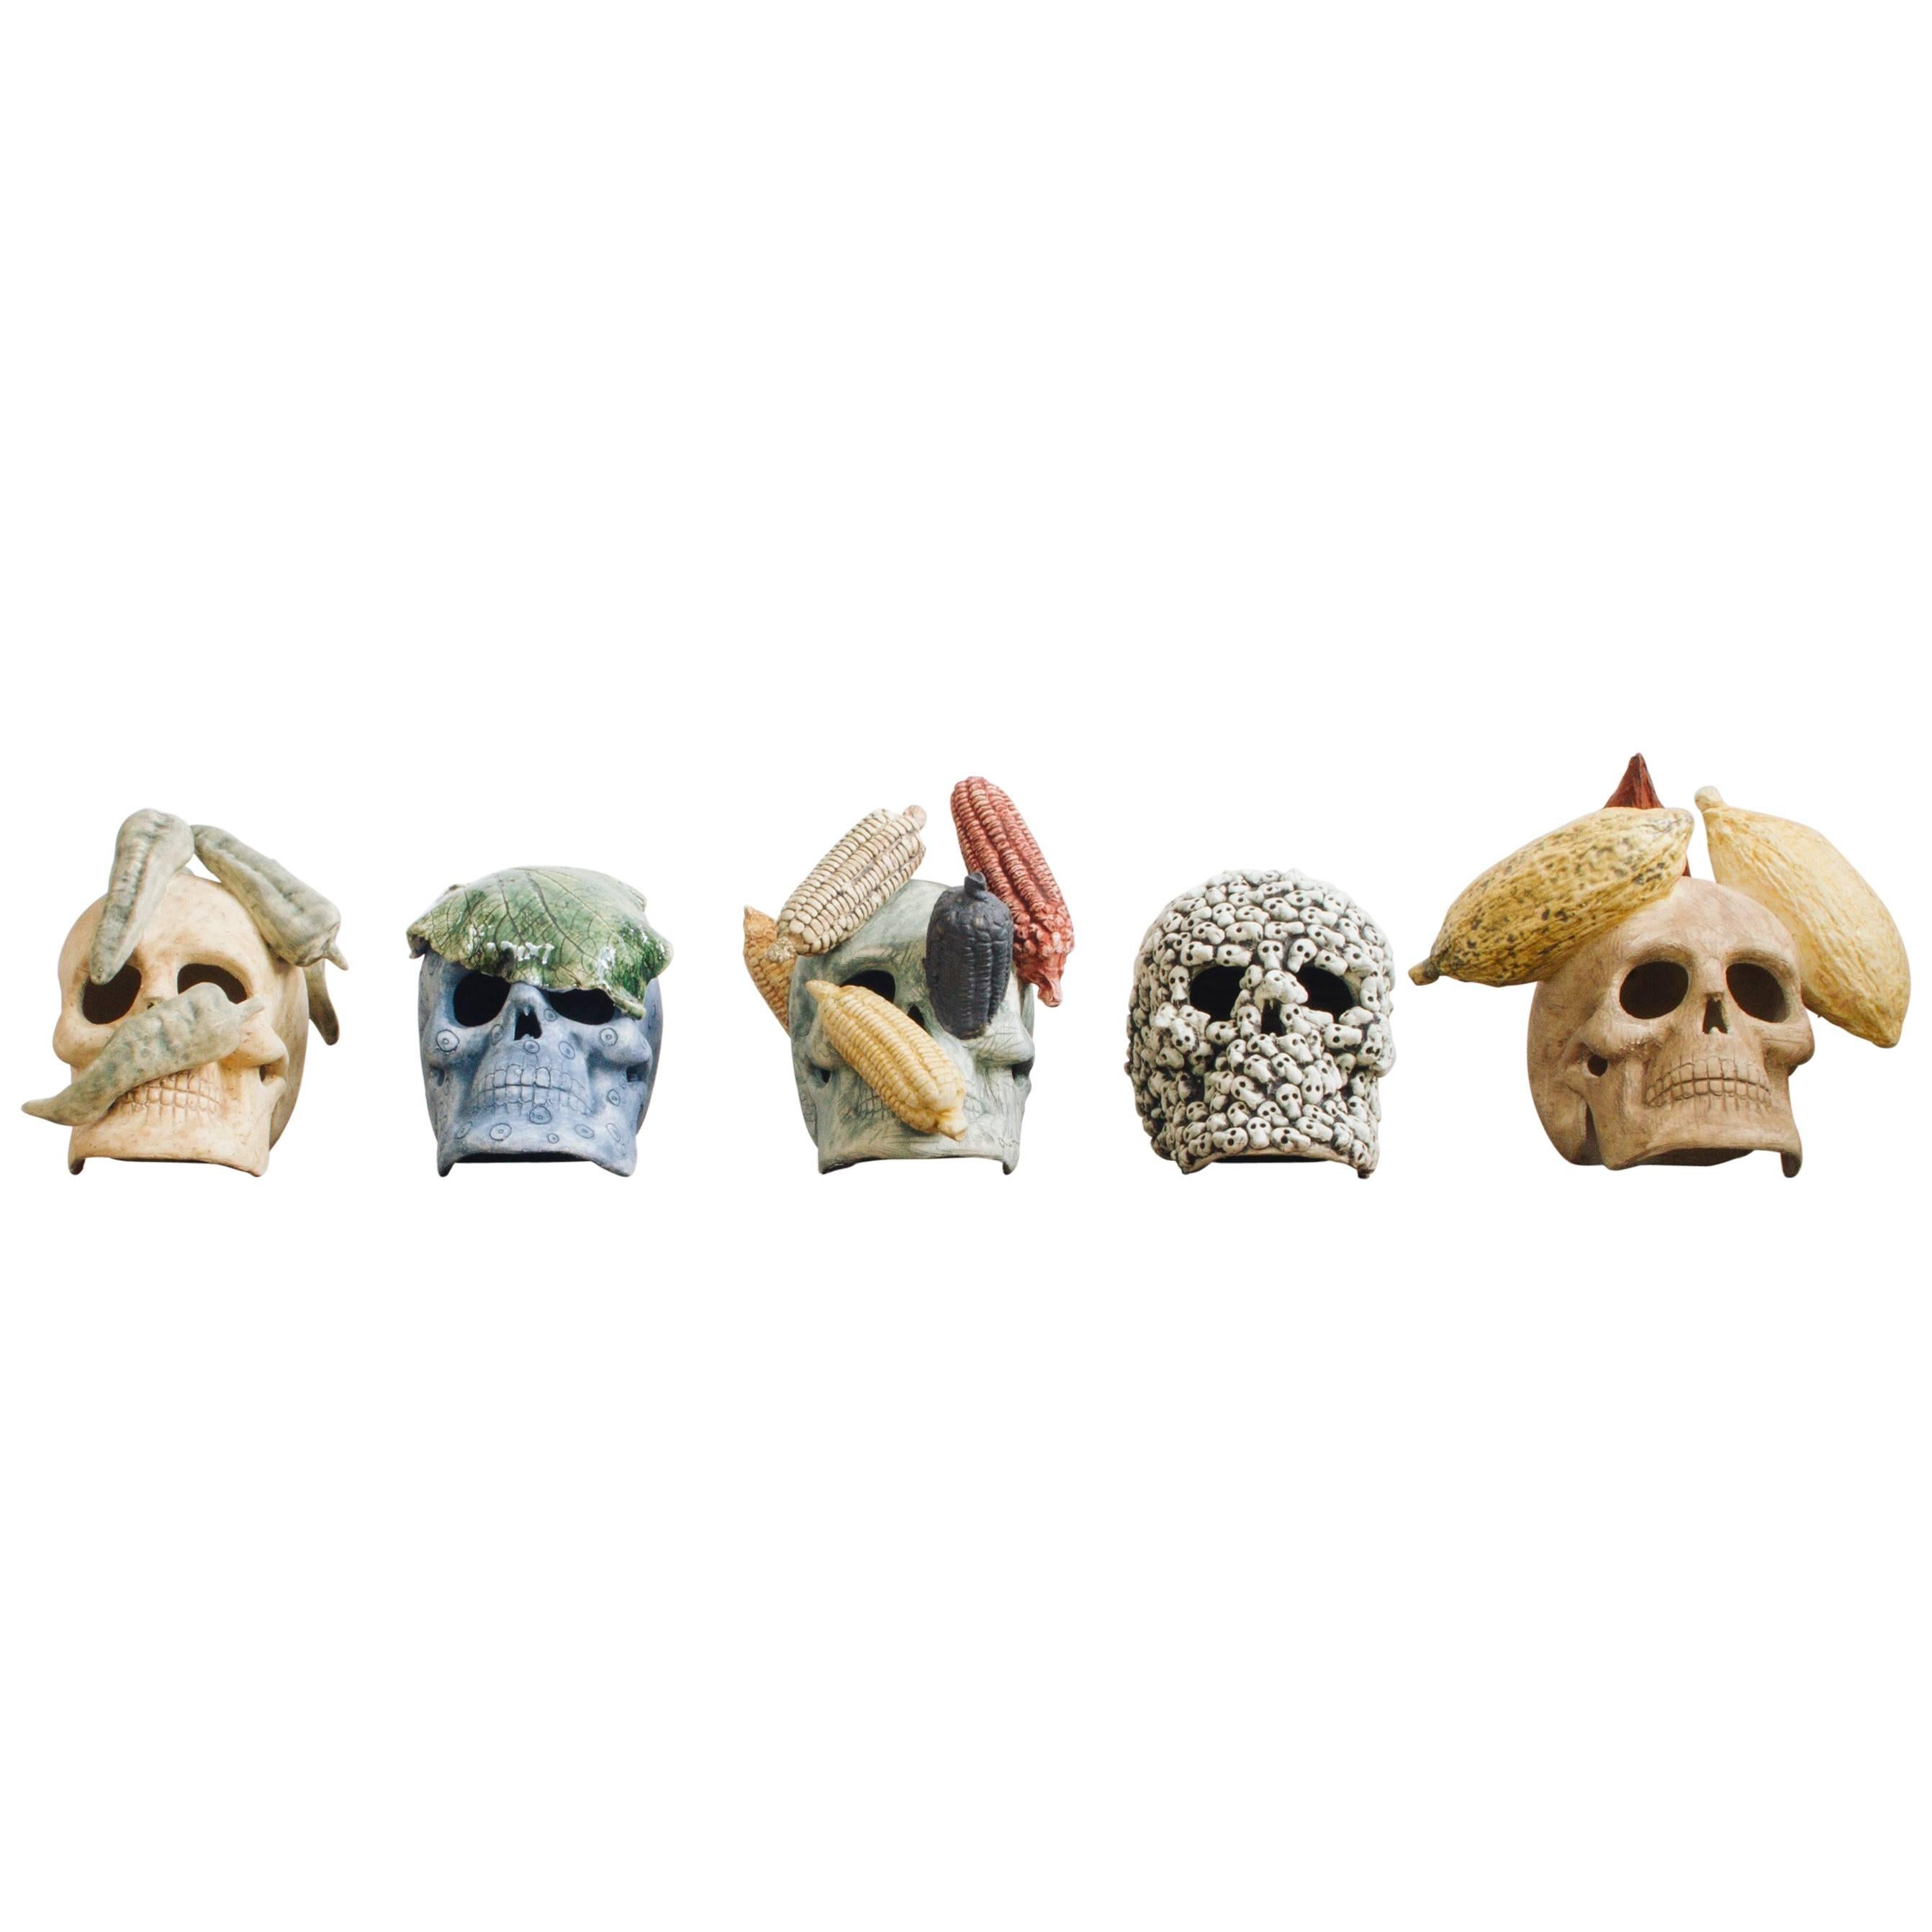 Mexican Handmade Ceramic Skull Sculpture Collection Made in Limited Editions For Sale